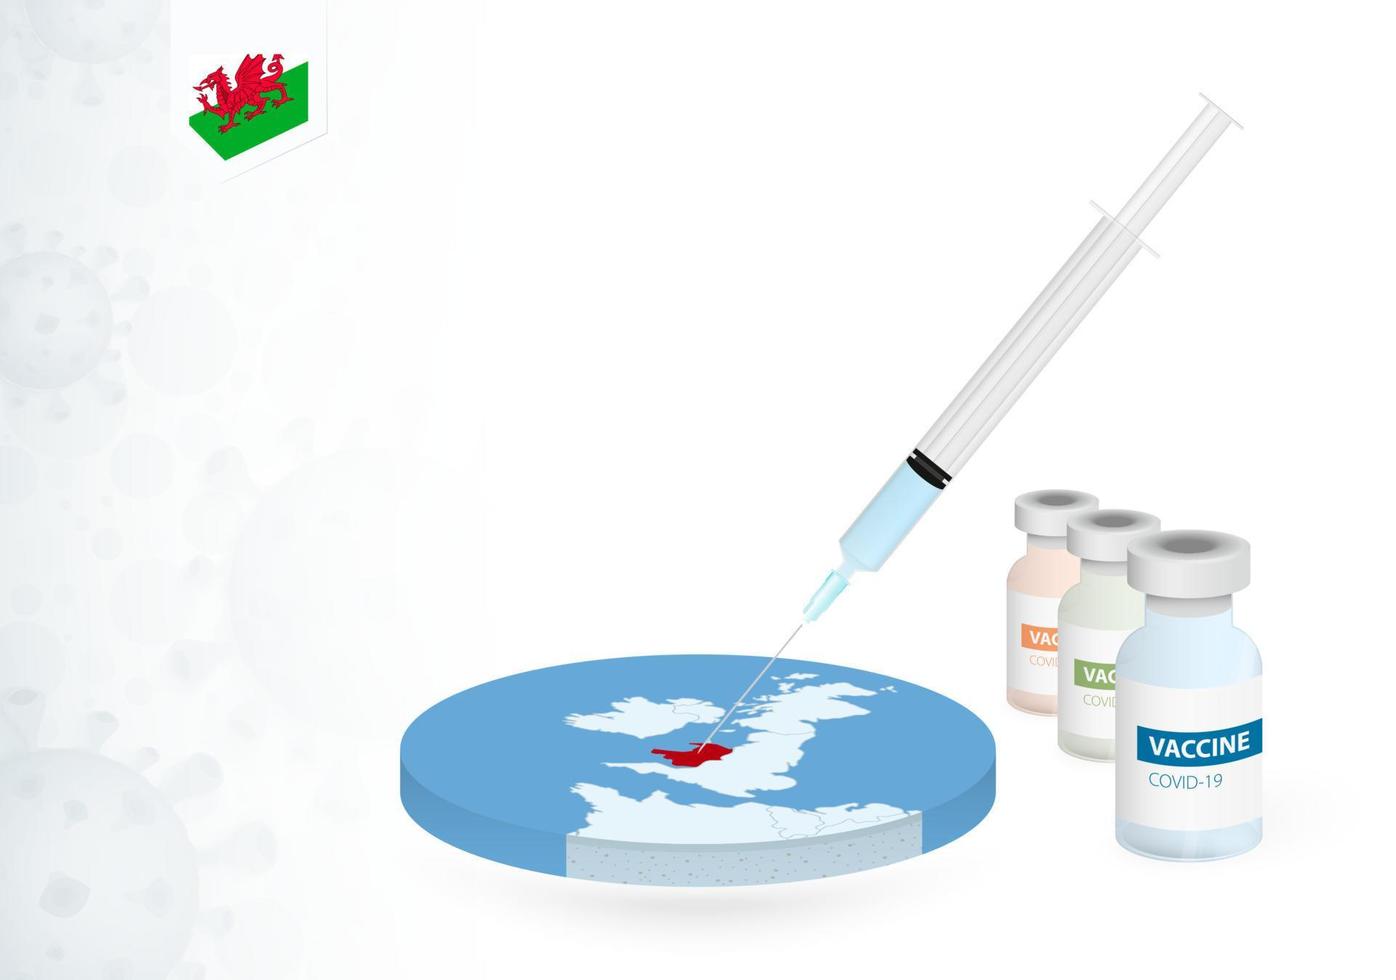 Vaccination in Wales with different type of COVID-19 vaccine. Concept with the vaccine injection in the map of Wales. vector